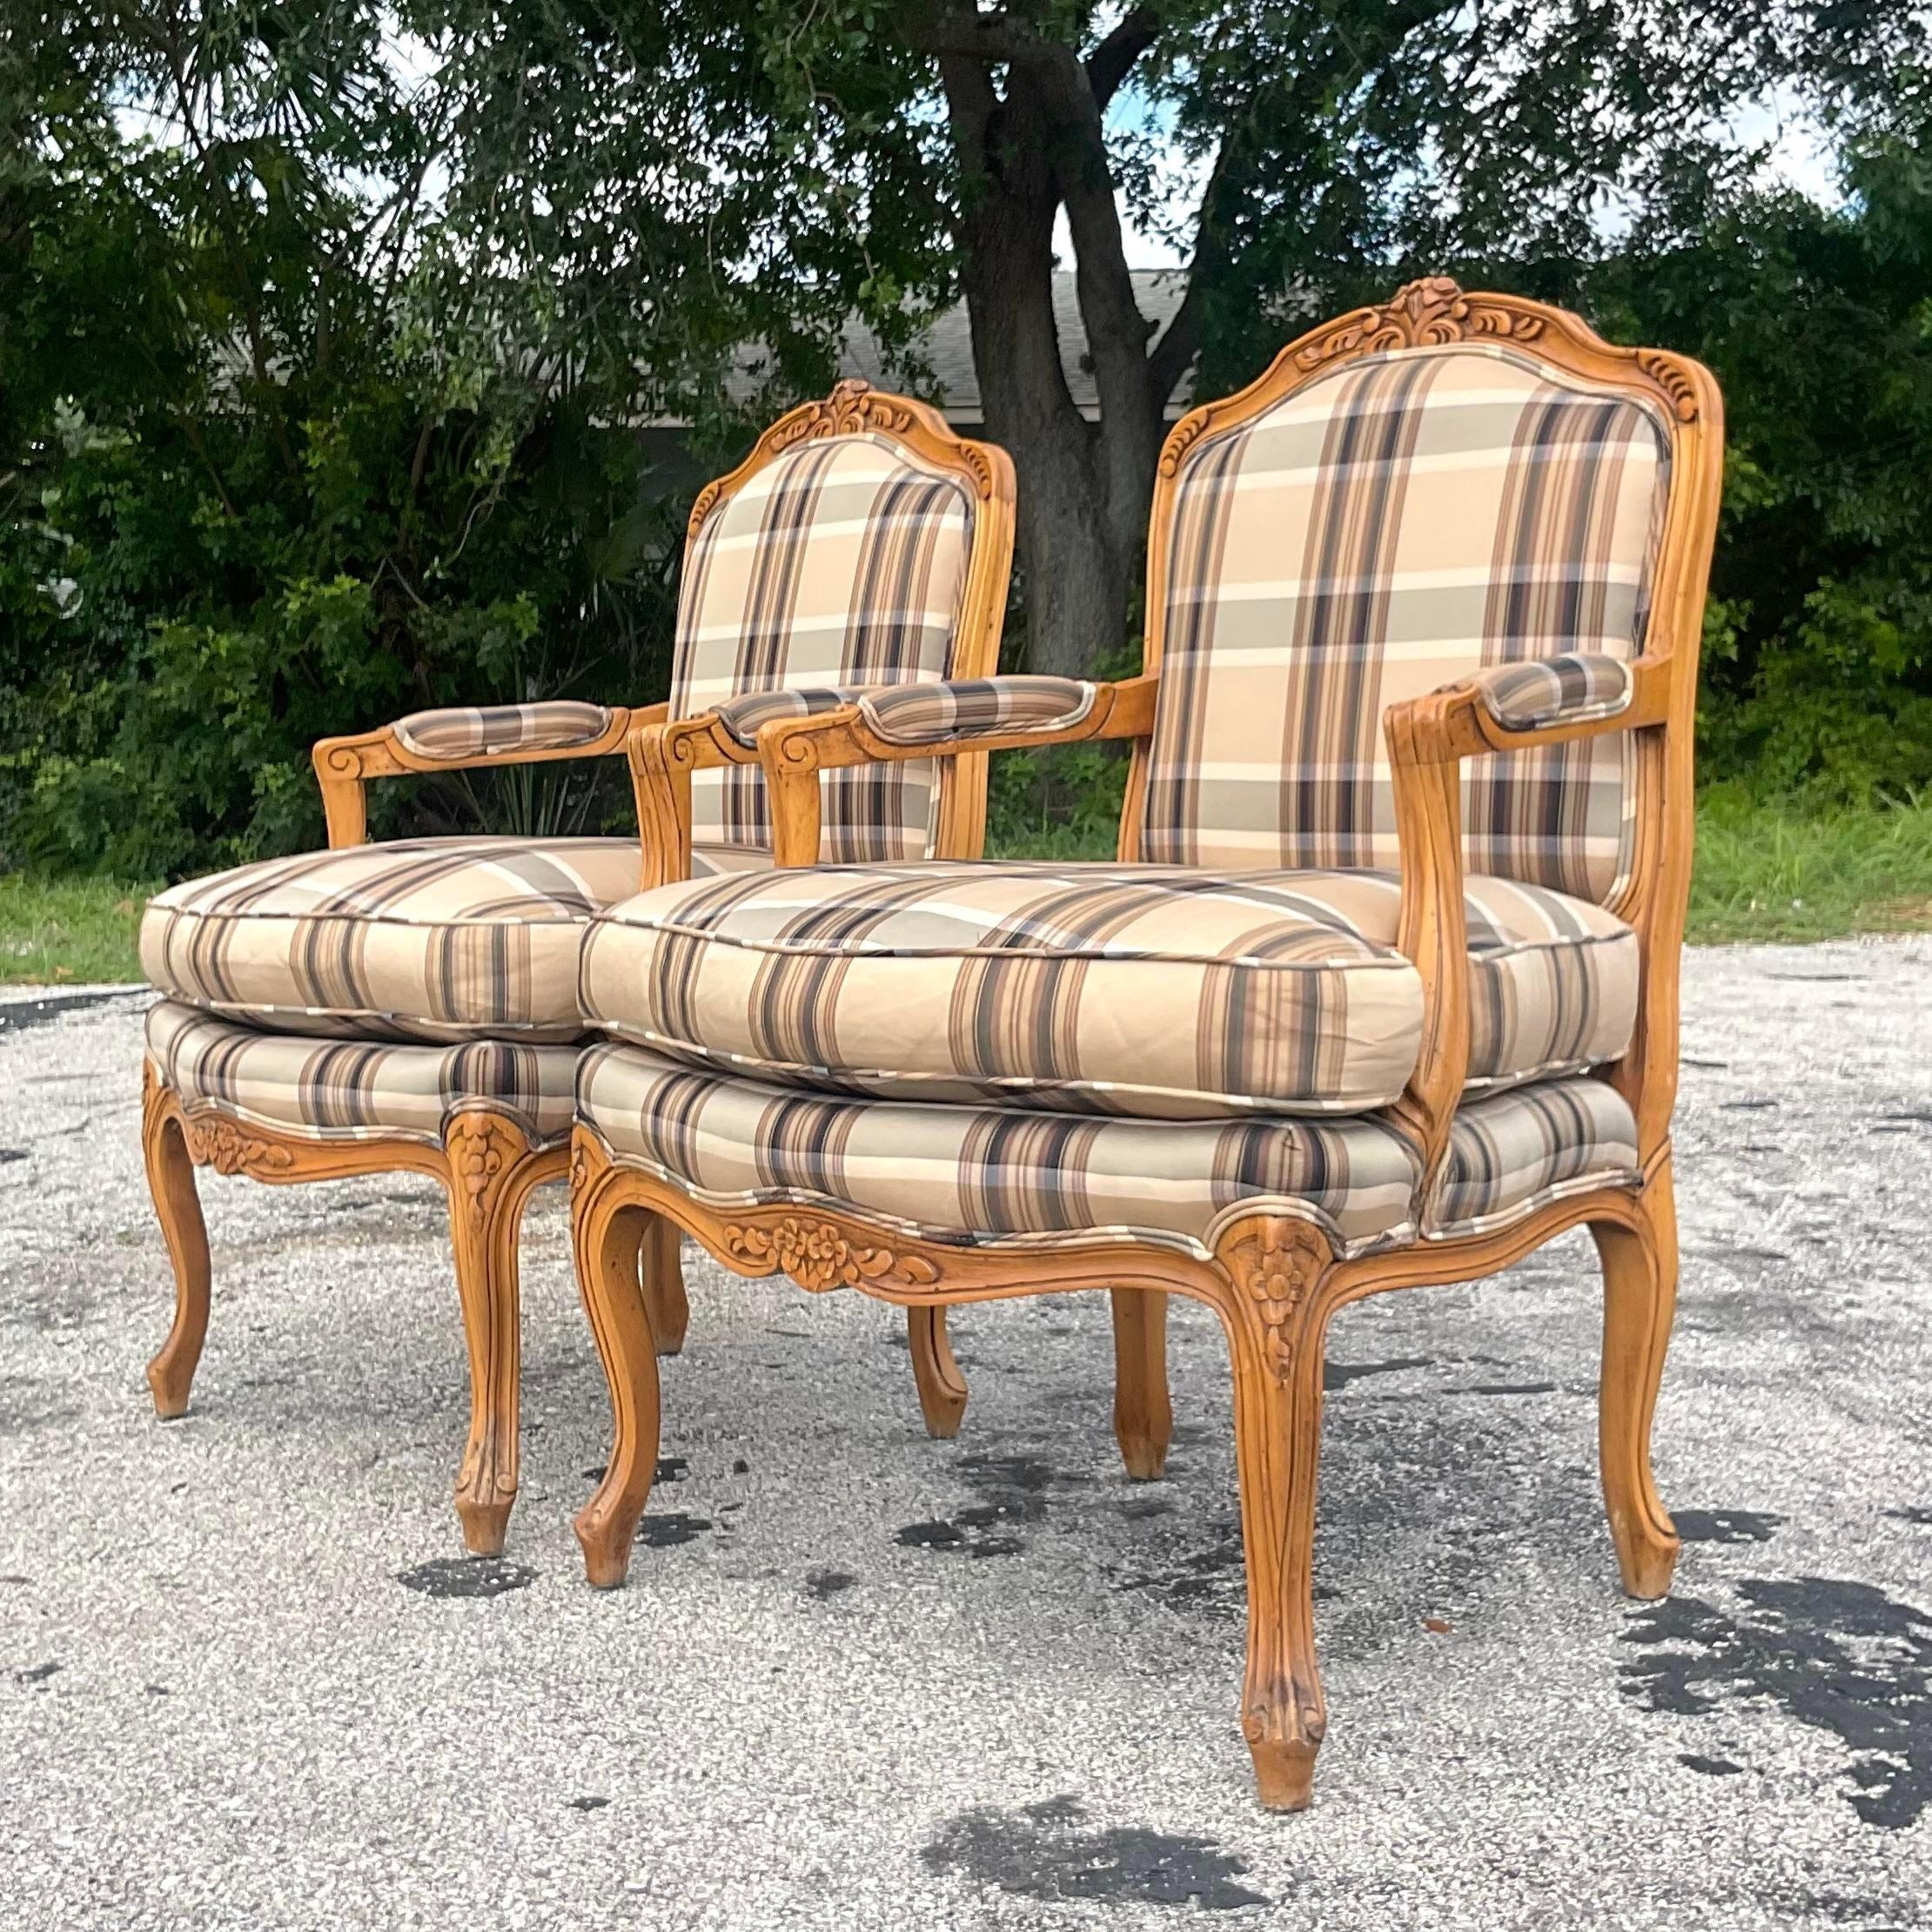 A fabulous pair of vintage Regency Bergere chairs. Made by the iconic Baker group. Beautiful neutral plaid in black and tan. Acquired from a Palm Beach estate.